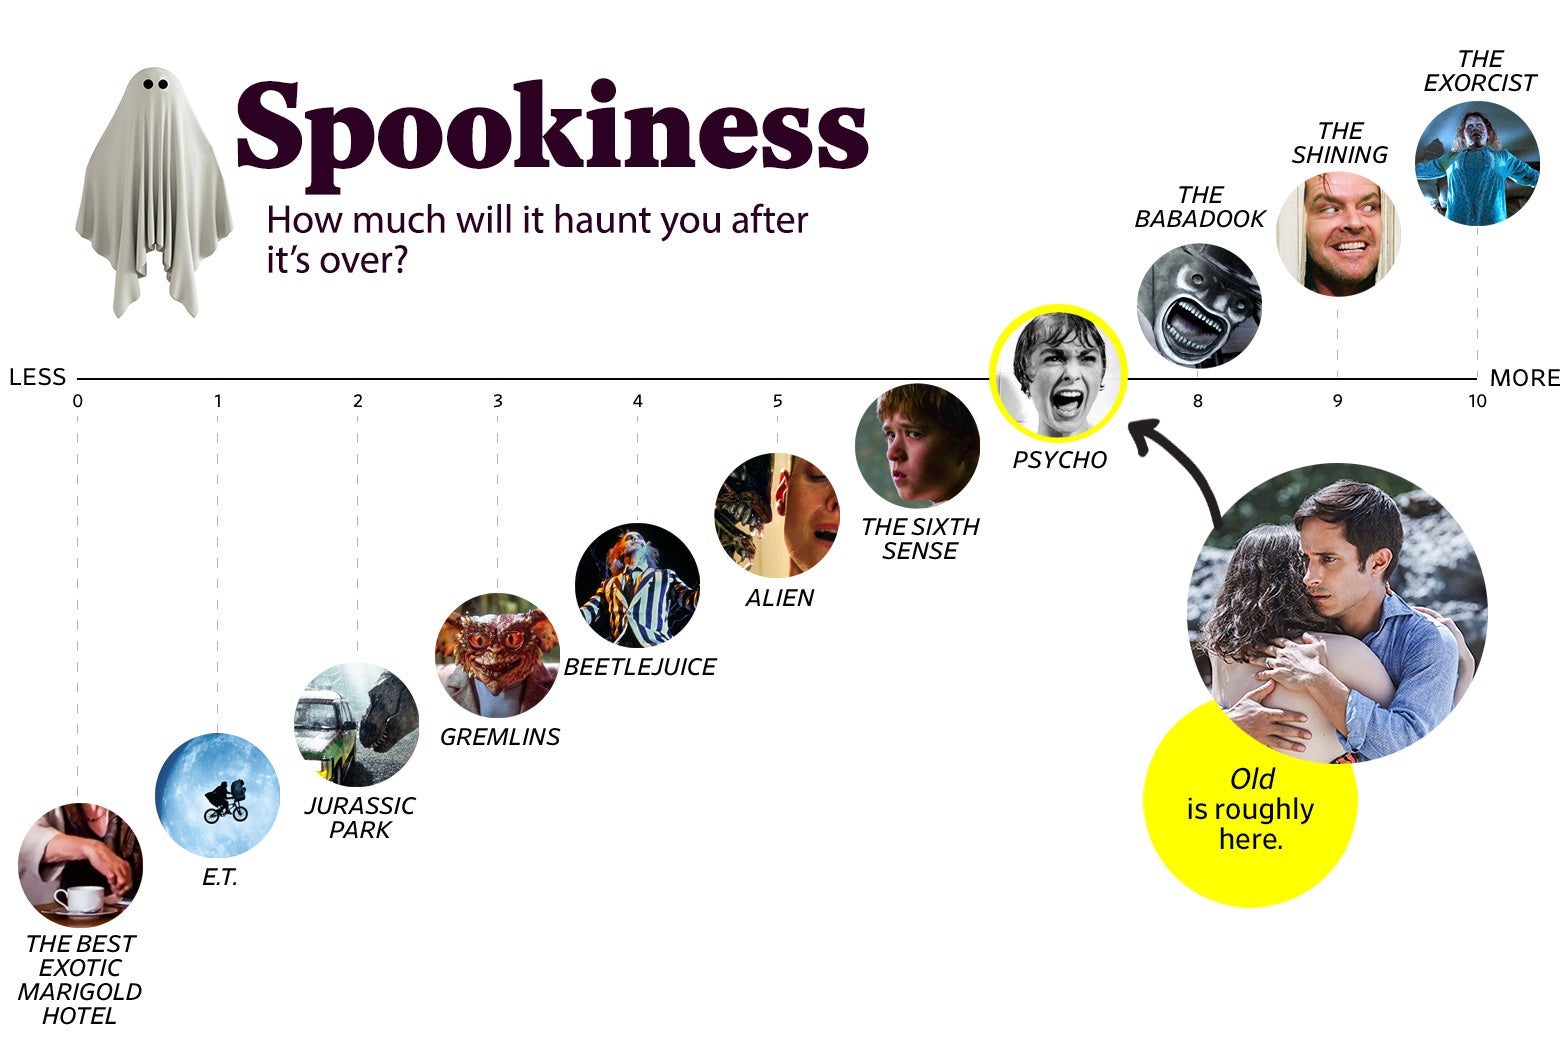 A chart titled “Spookiness: How much will it haunt you after the movie is over?” shows that Old ranks a 7 in spookiness, roughly the same as Psycho, and one point higher than The Sixth Sense. The scale ranges from The Best Exotic Marigold Hotel (0) to The Exorcist (10).